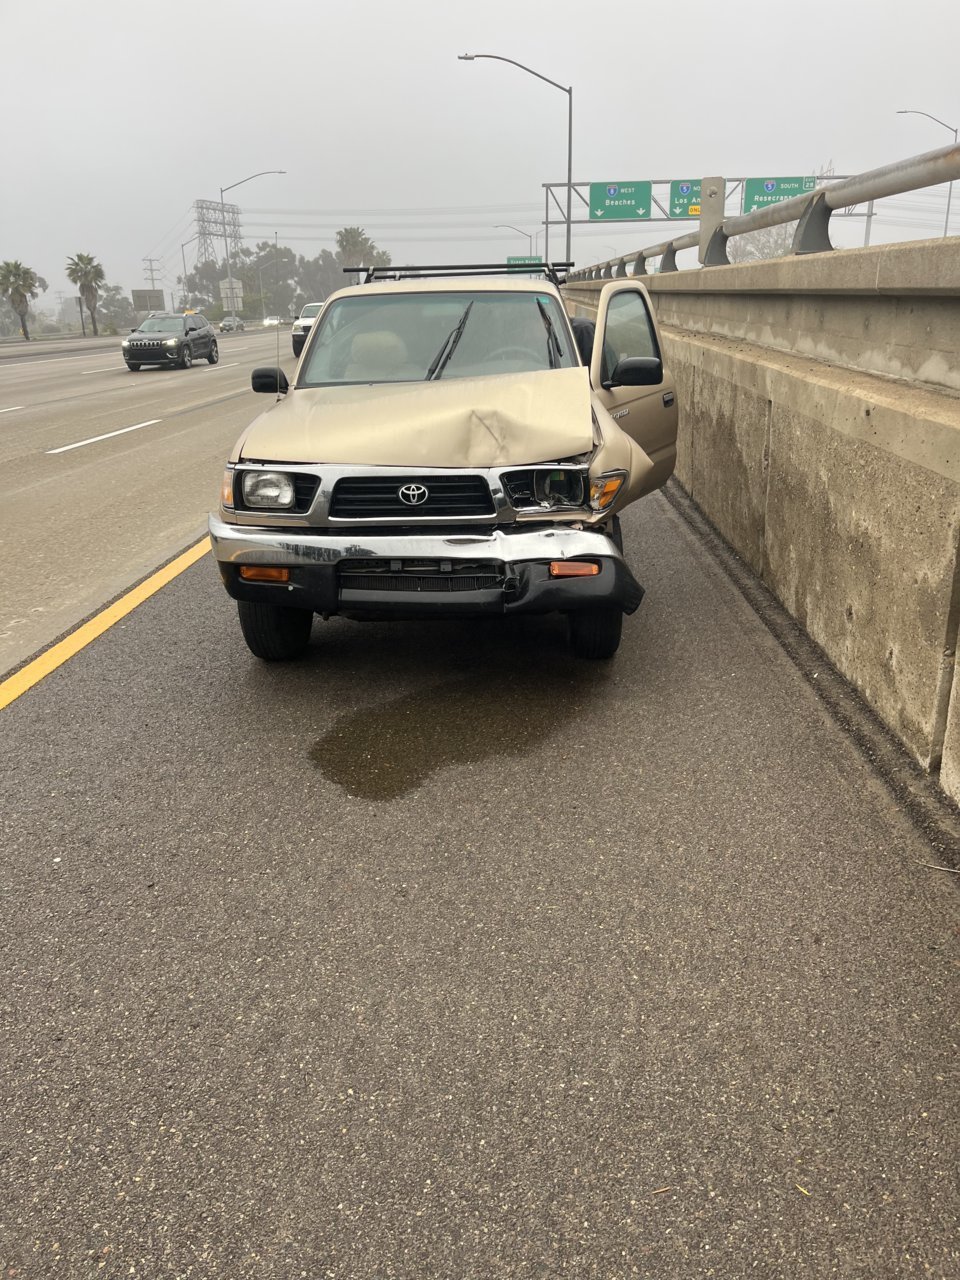 97 4cyl front damage in CA.jpg